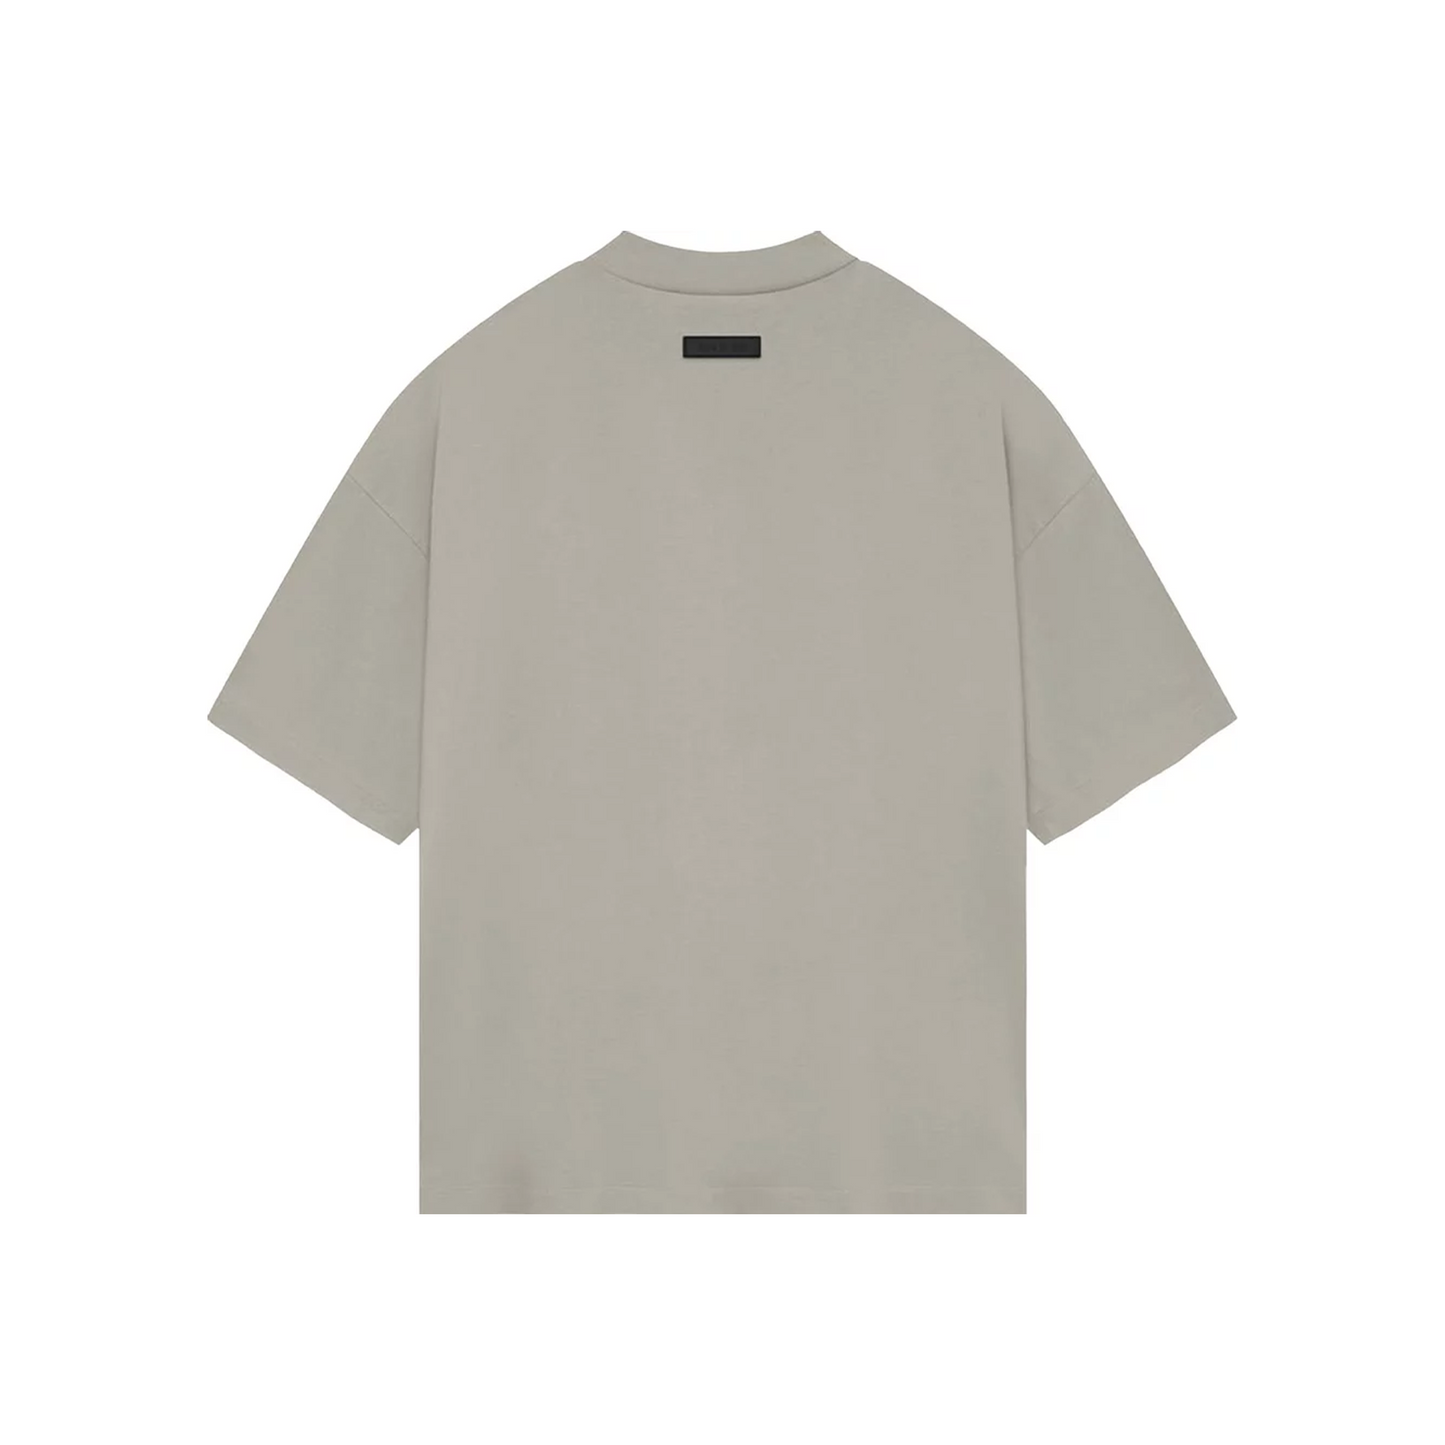 Fear of God Essentials Heavy Jersey Tee Seal (FW23)